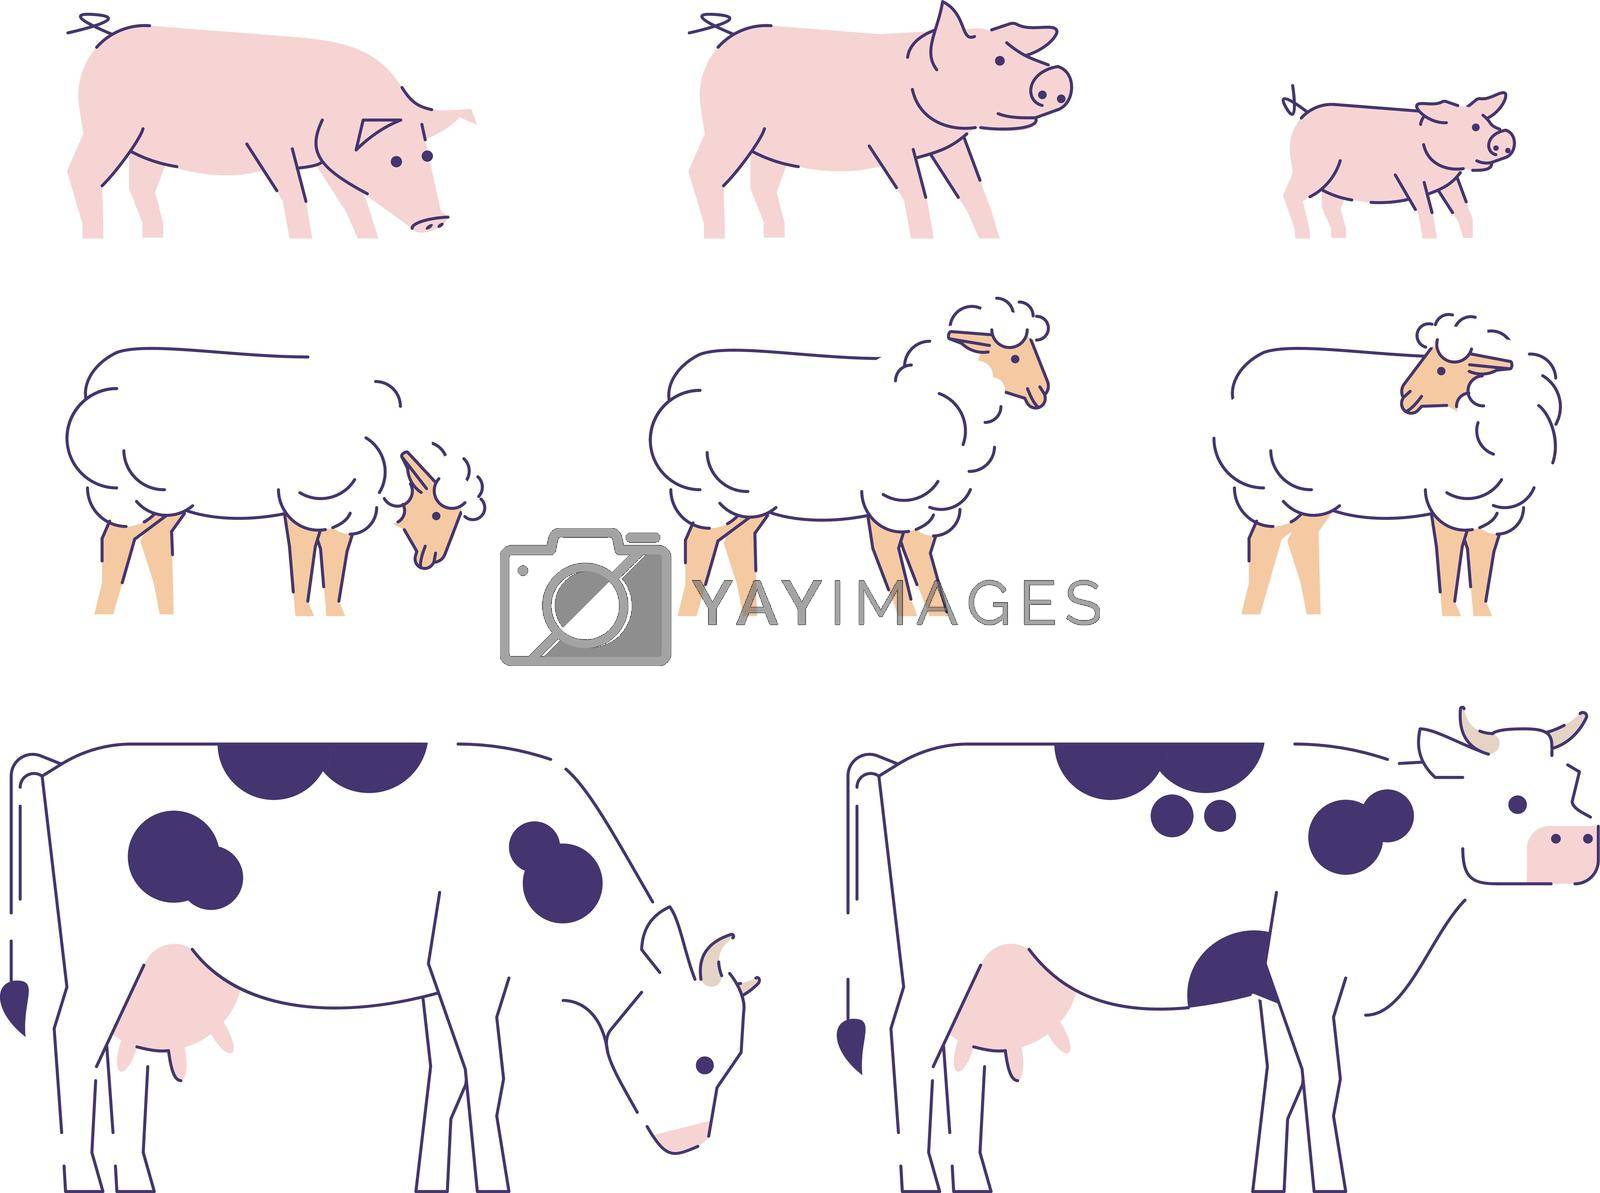 Agricultural animals flat vector illustration. Livestock farming, domestic animals husbandry design elements with outline. Cows, sheeps and pigs side view isolated on white background